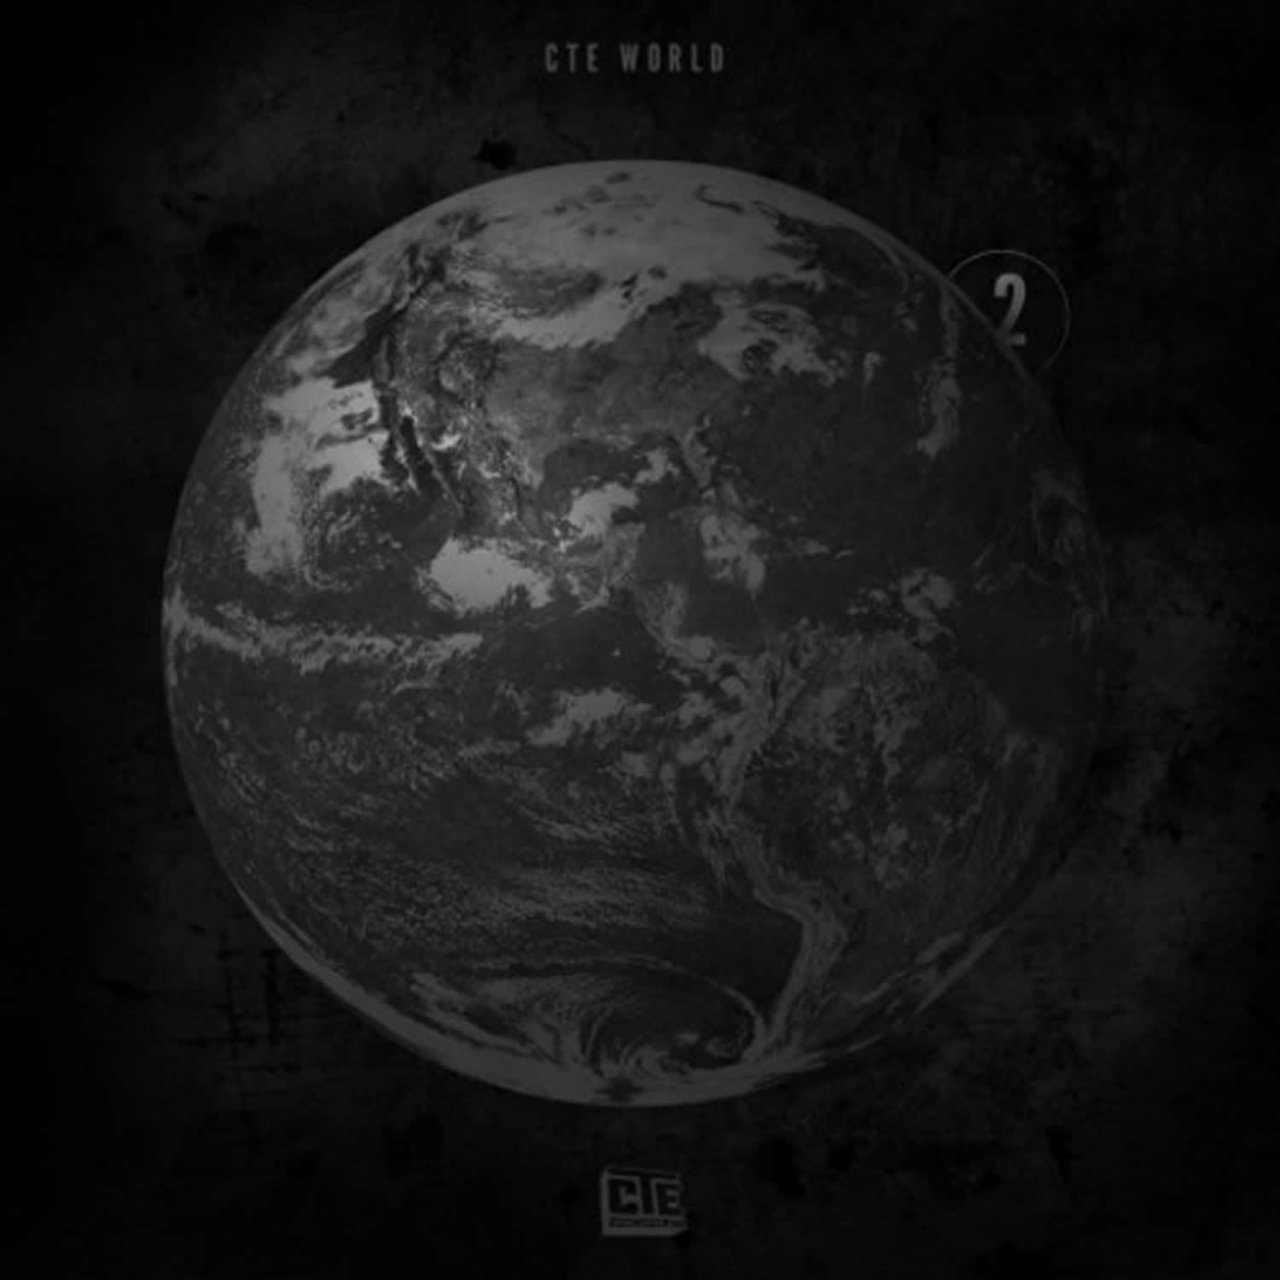 Jeezy and CTE - ItsThaWorld 2 (Cover)